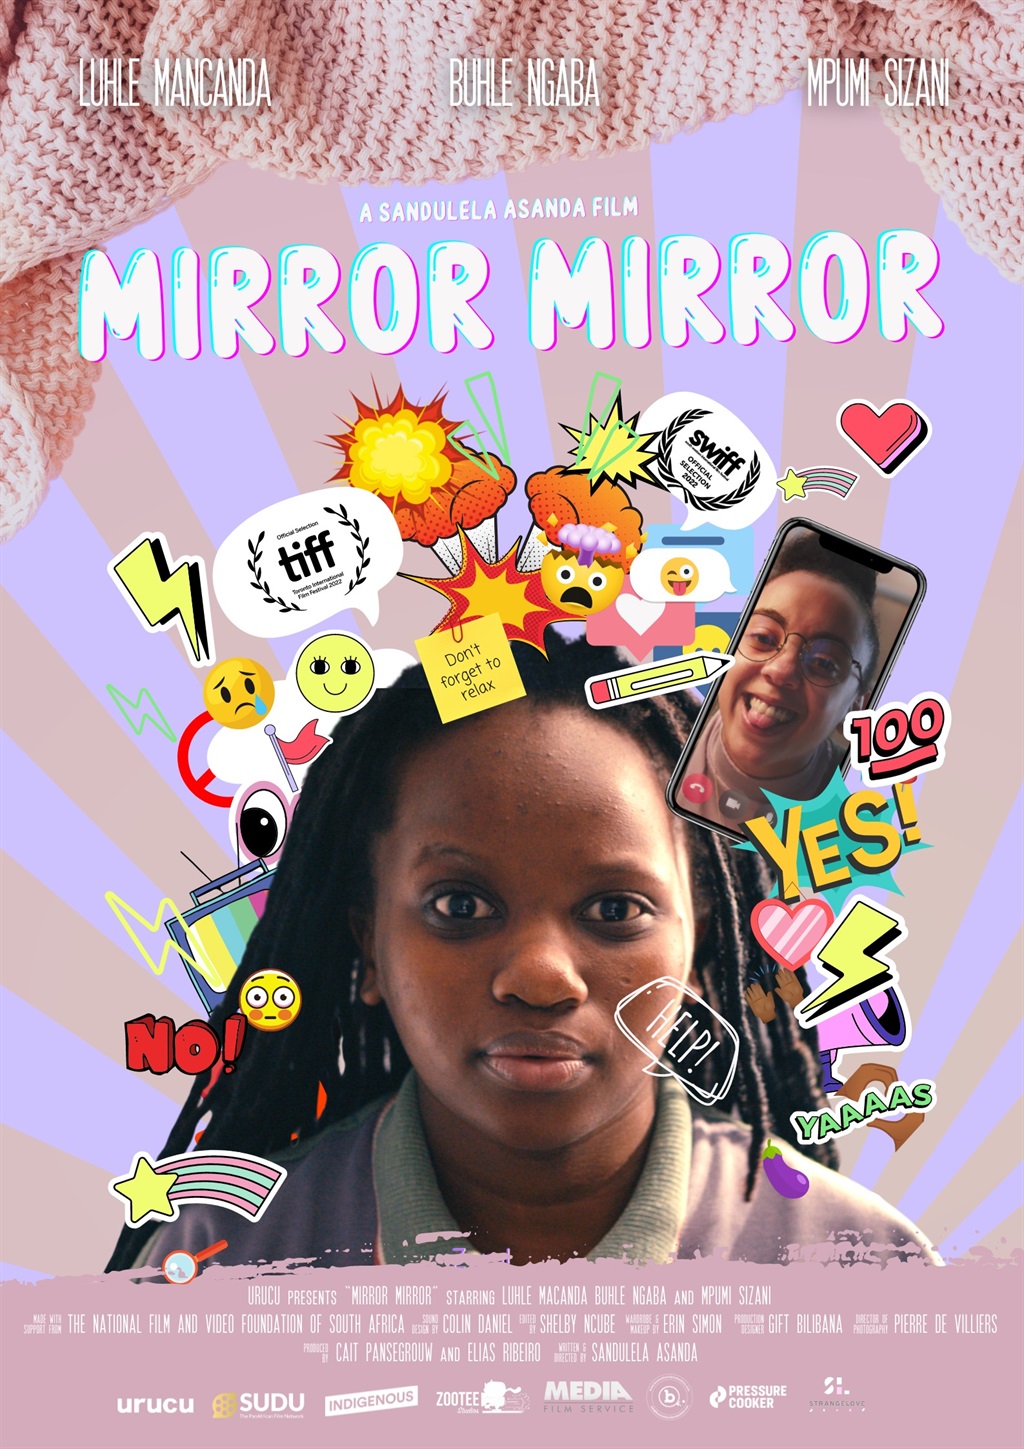 Mirror Mirror will be presented at this year's Joburg Film Festival, which is said to be one of the top five festivals in the entire continent